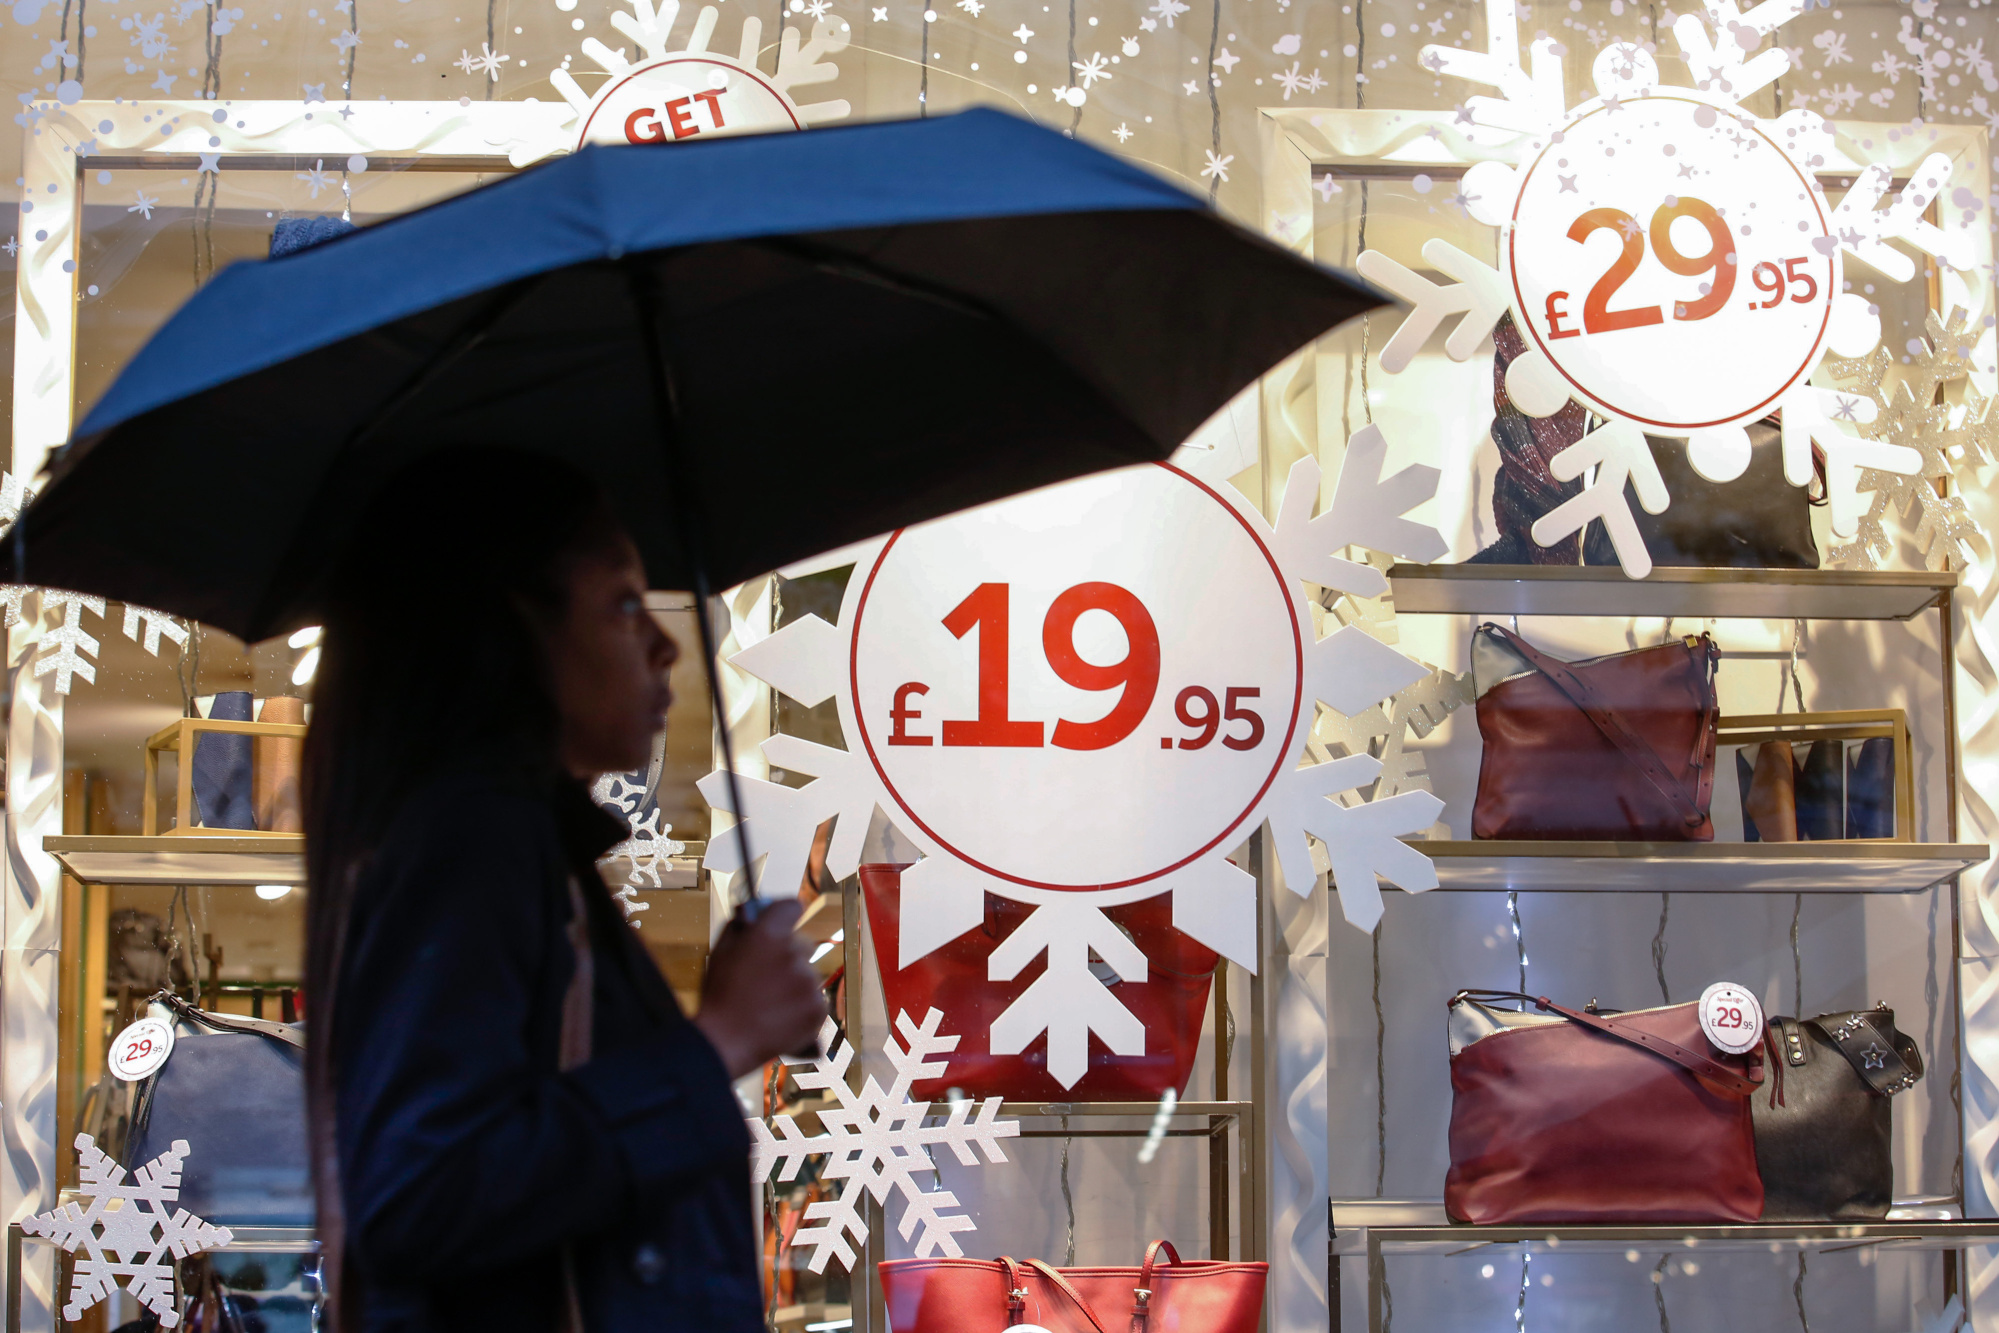 A shopper carries an umbrella past a festive window display on Oxford Street in central London, U.K., on Tuesday, Nov. 7, 2017. U.K. retail sales fell the most in seven months in October, indicating continued caution among consumers just weeks before the crucial Christmas shopping season.